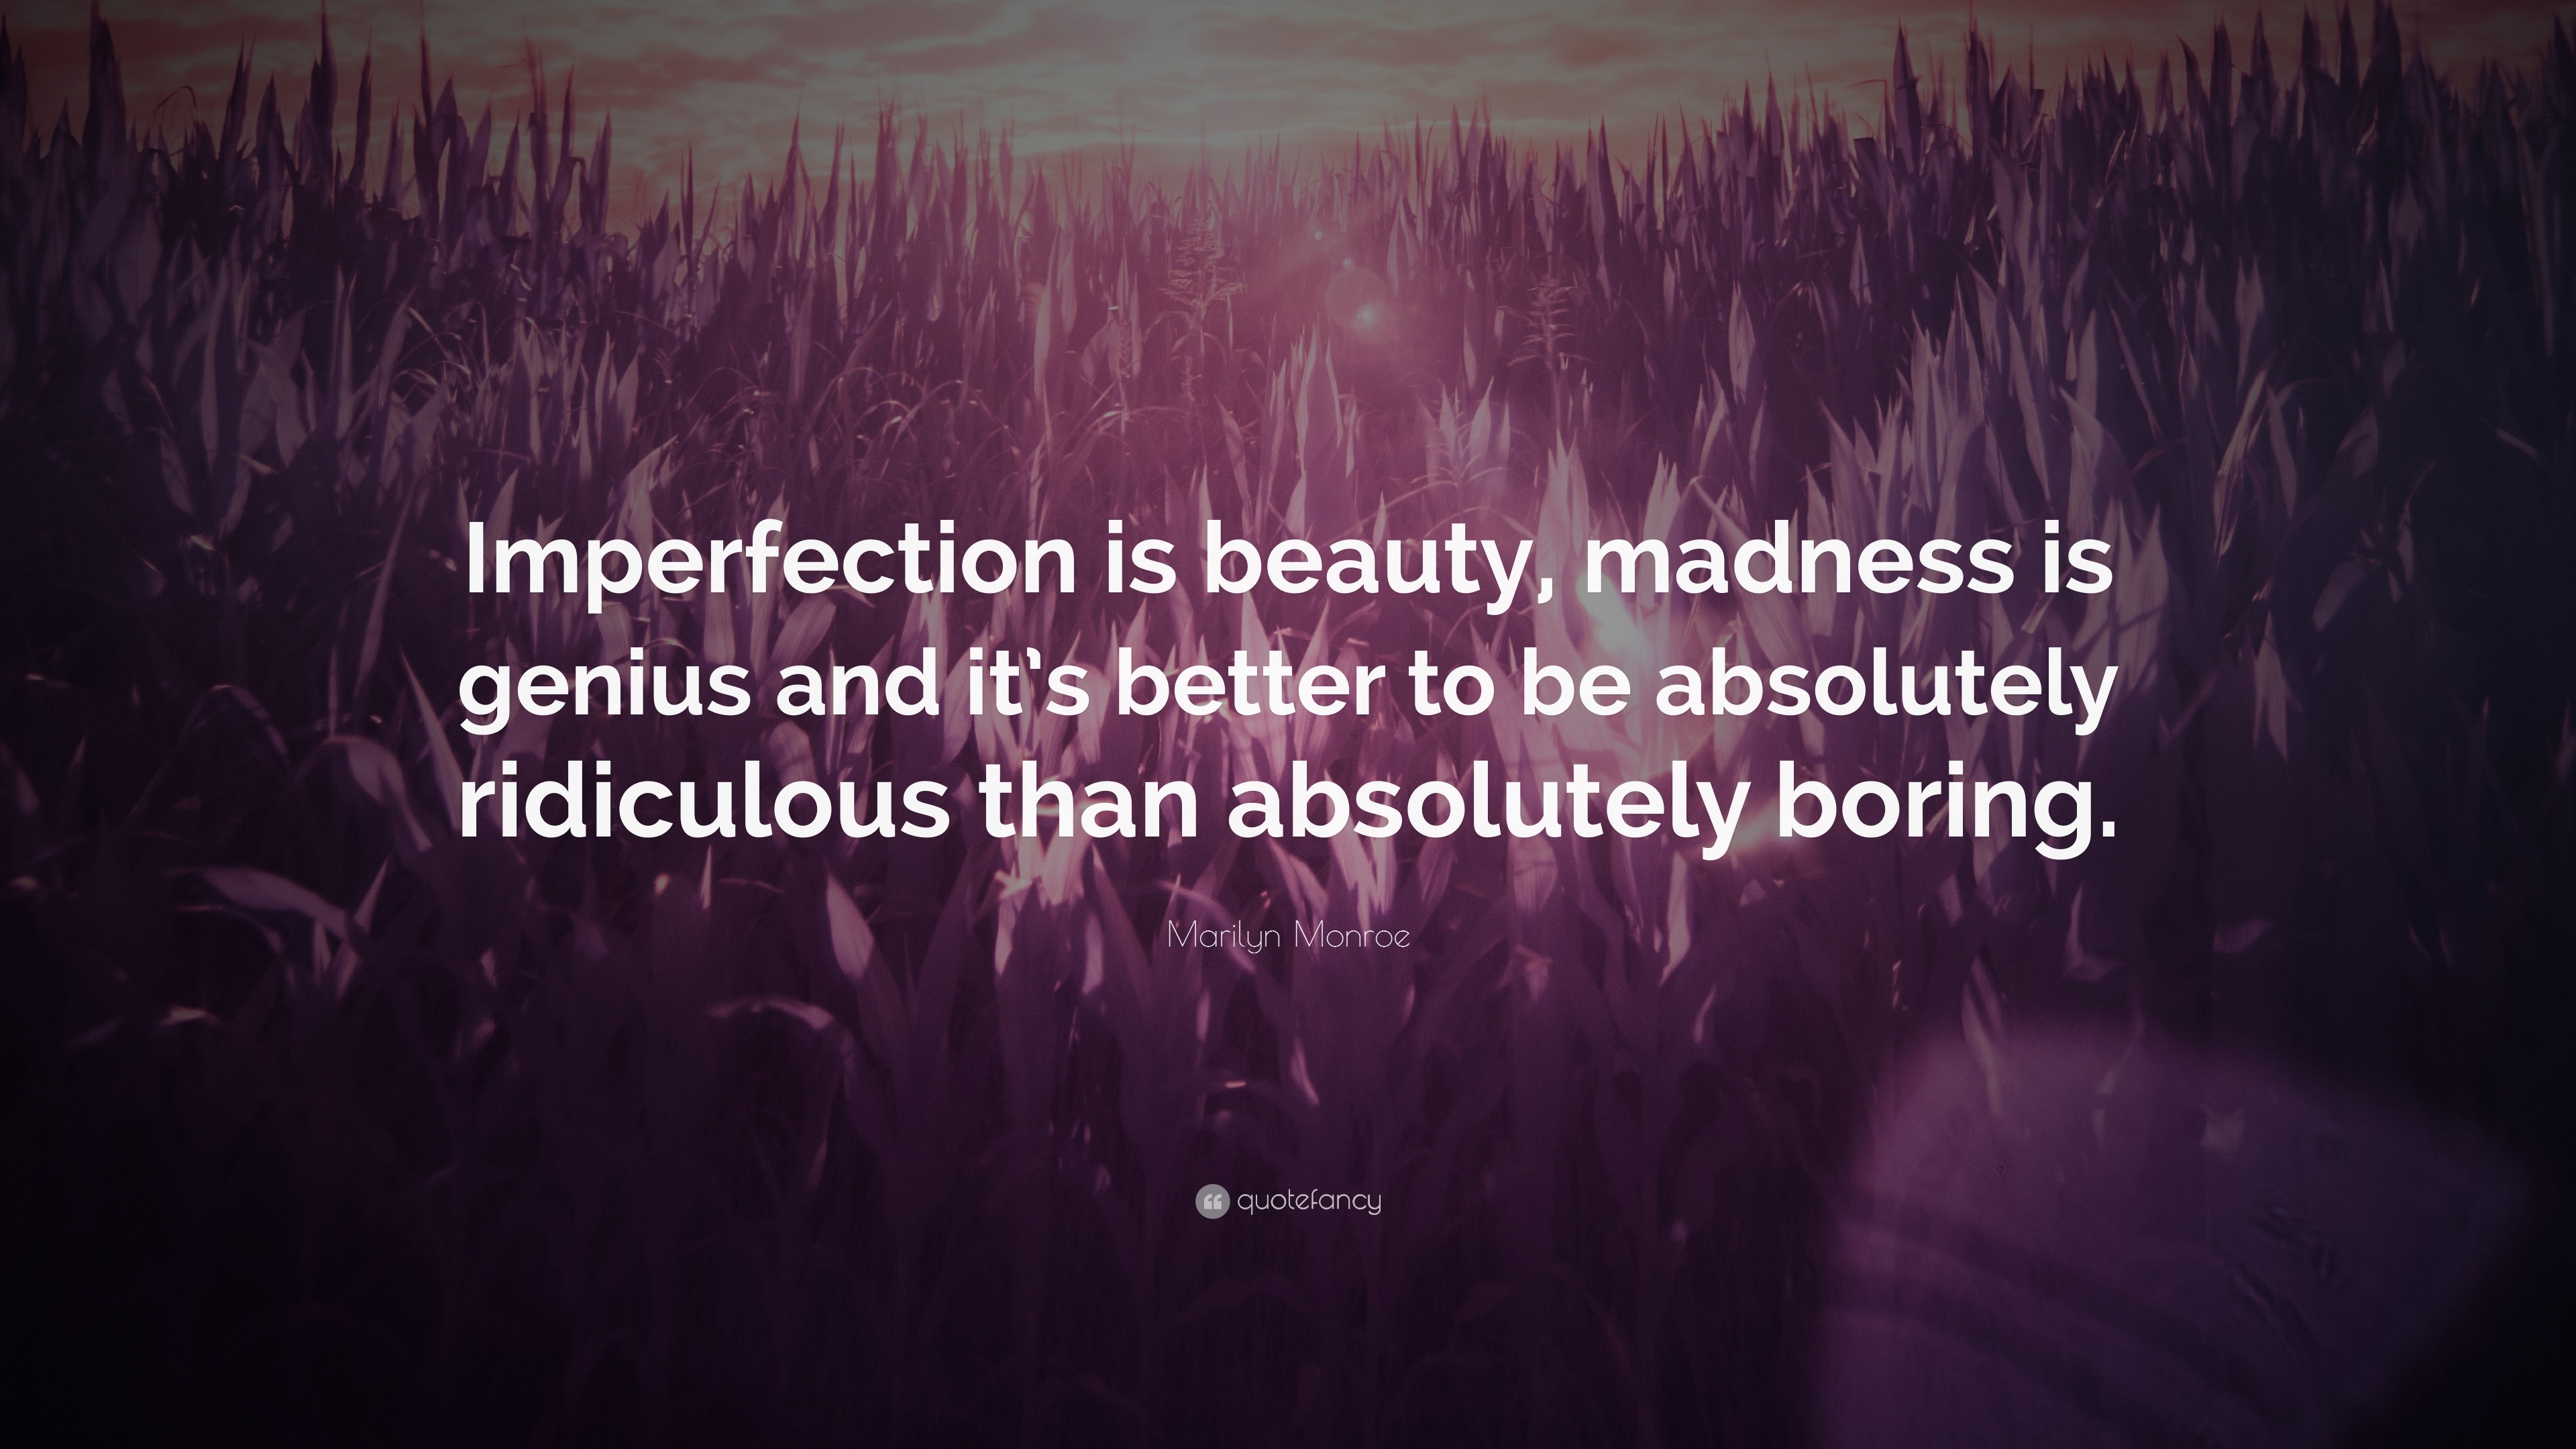 And Beauty Madness Imperfection It Genius Is